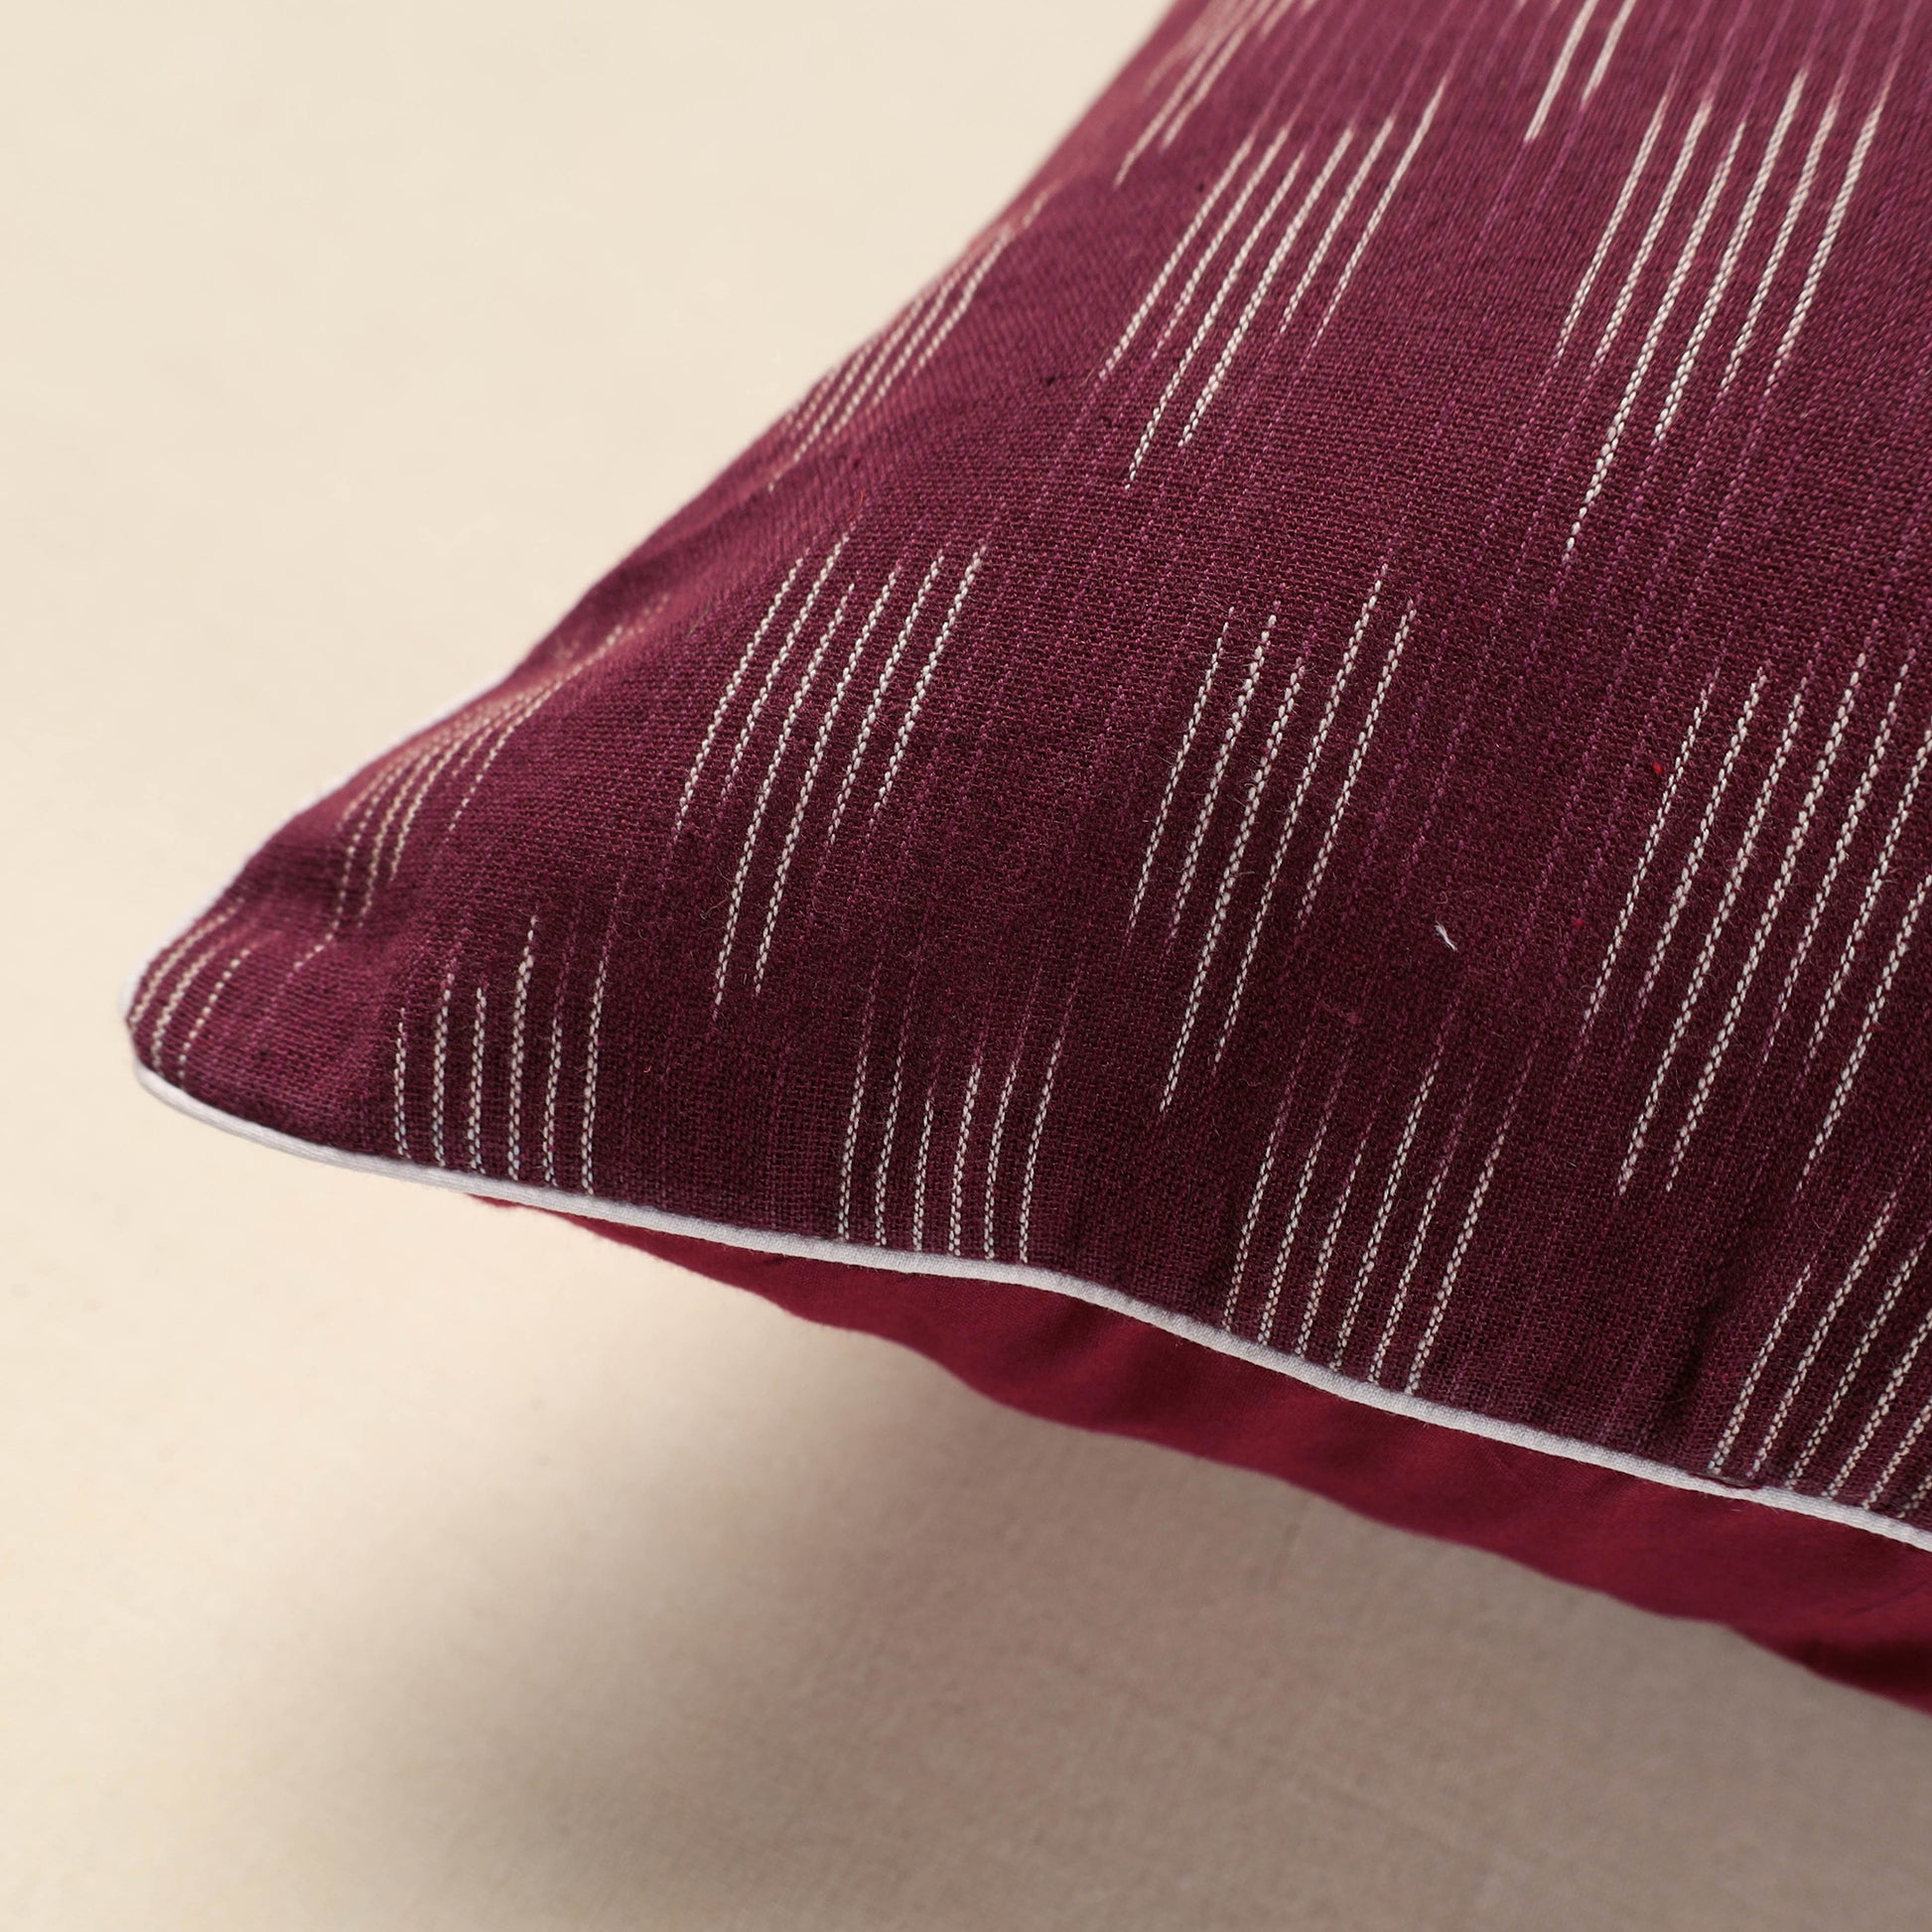 Ikat Cotton Cushion Cover